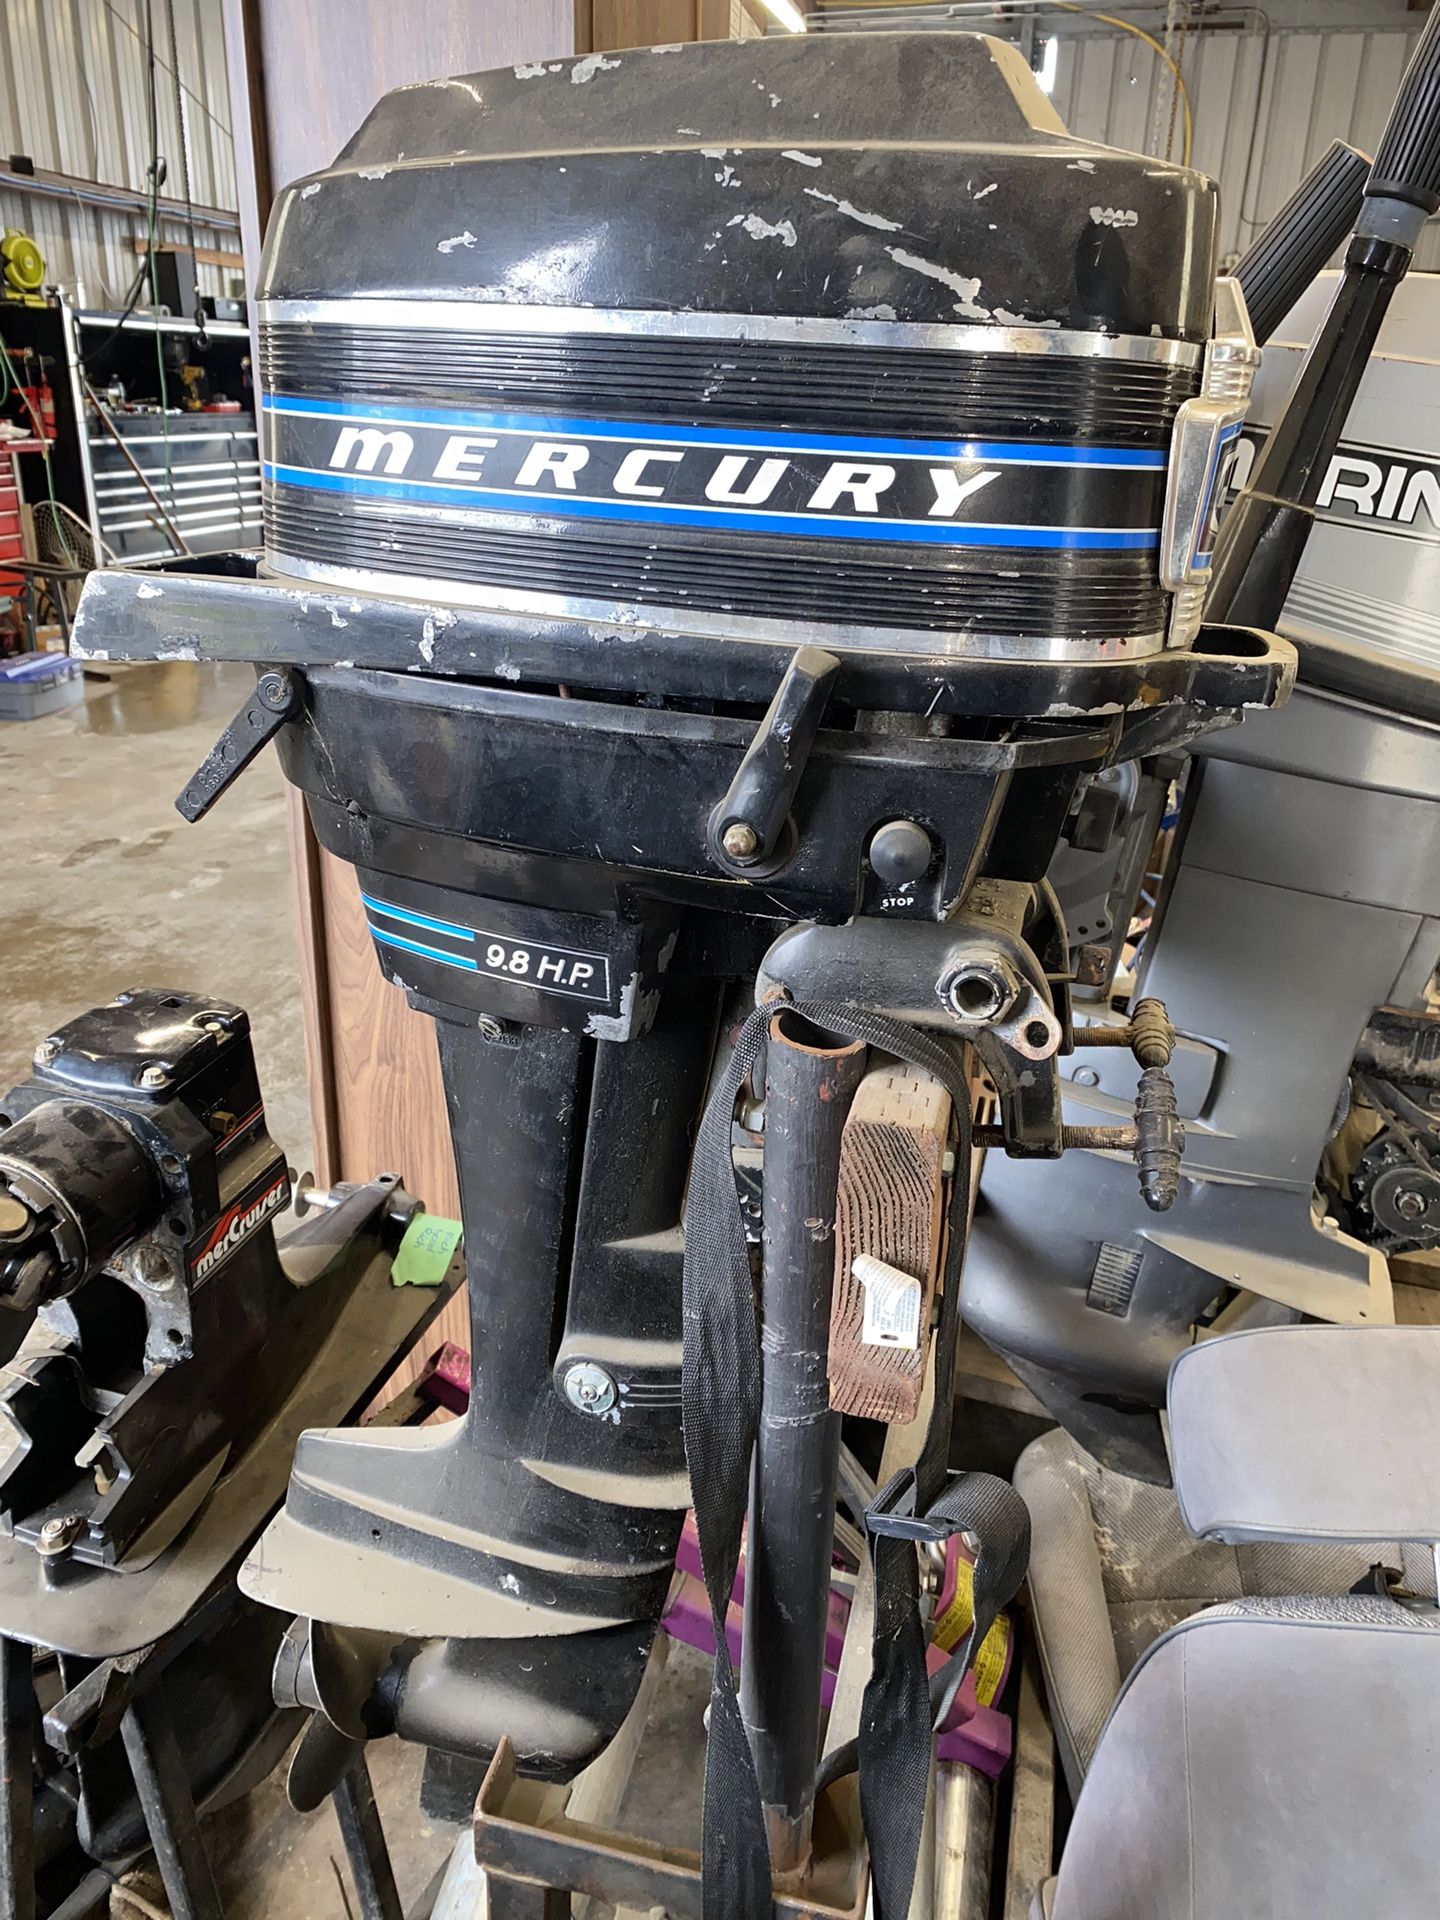 Outboard Motor with Tiller Arm